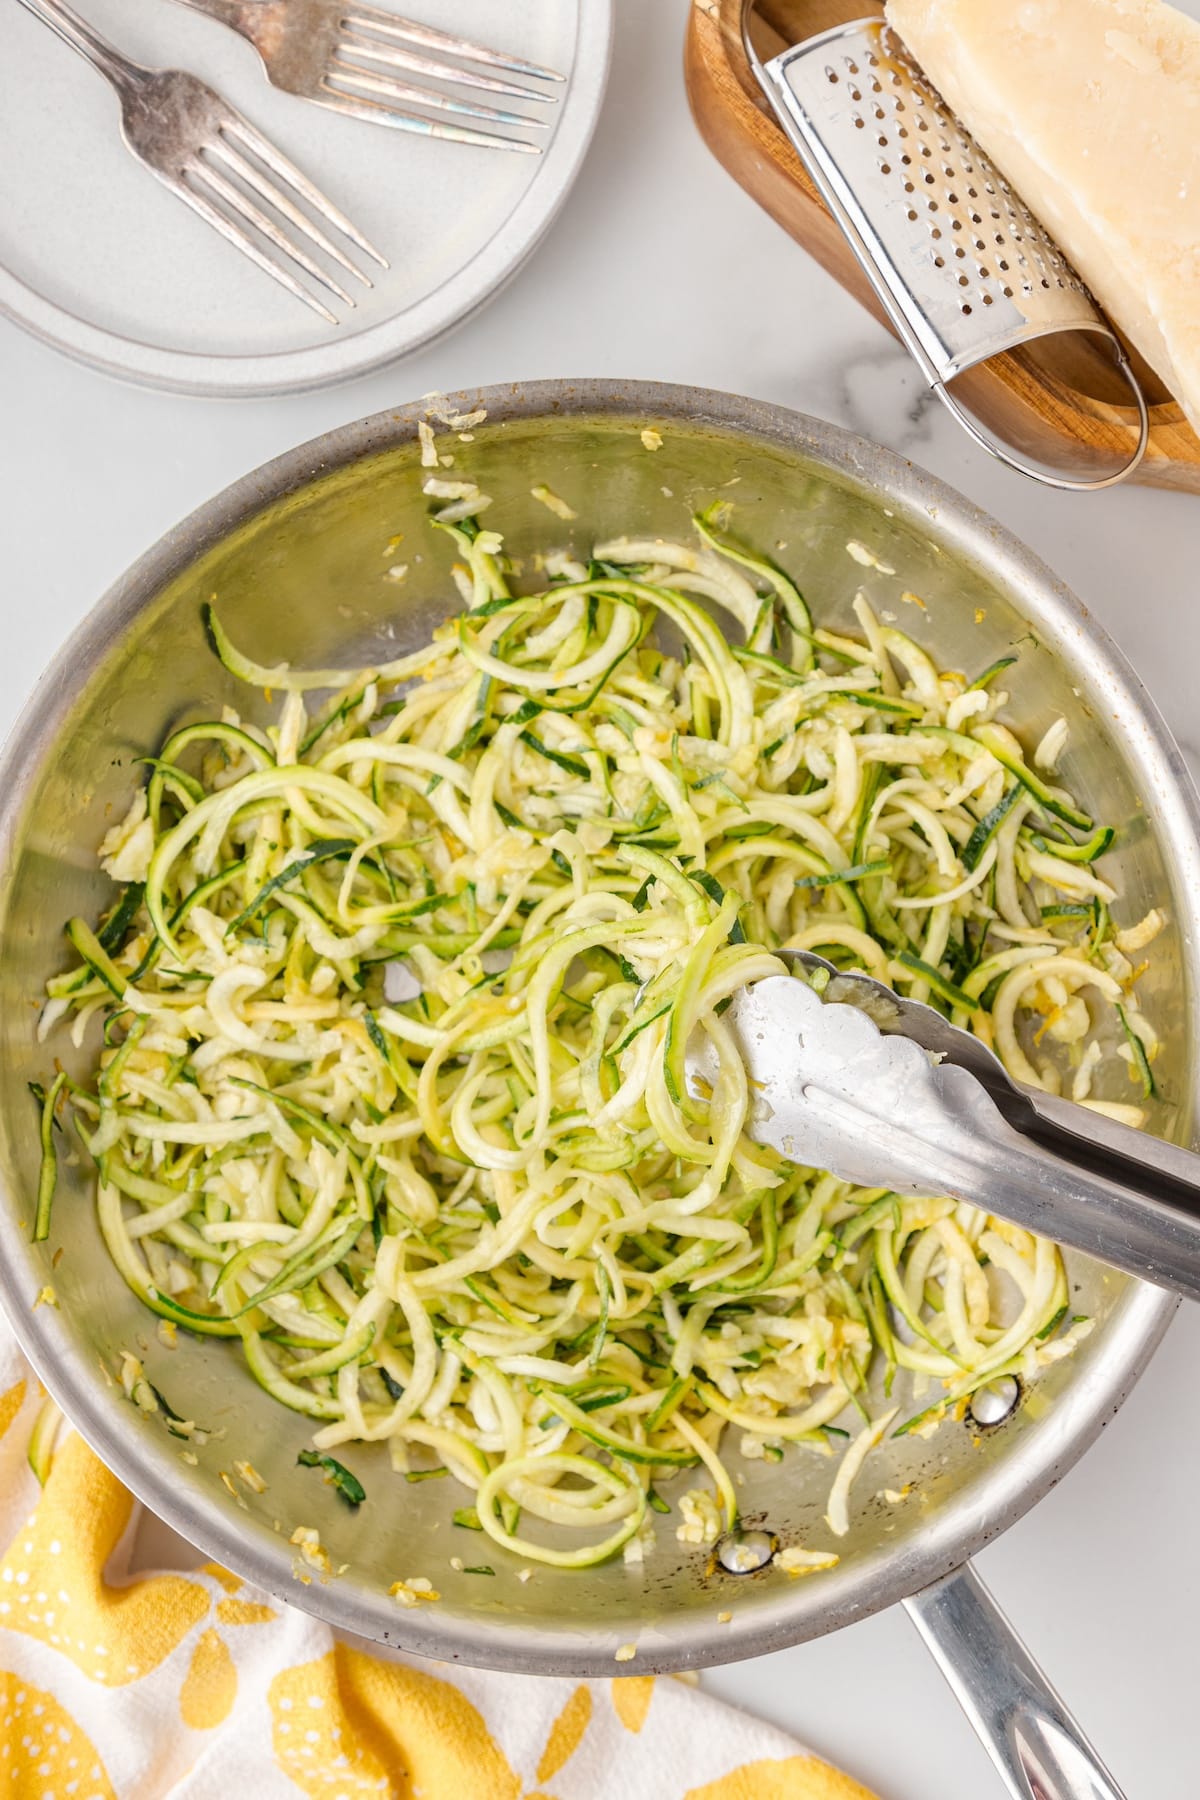 add the zucchini noodles to the skillet and saute